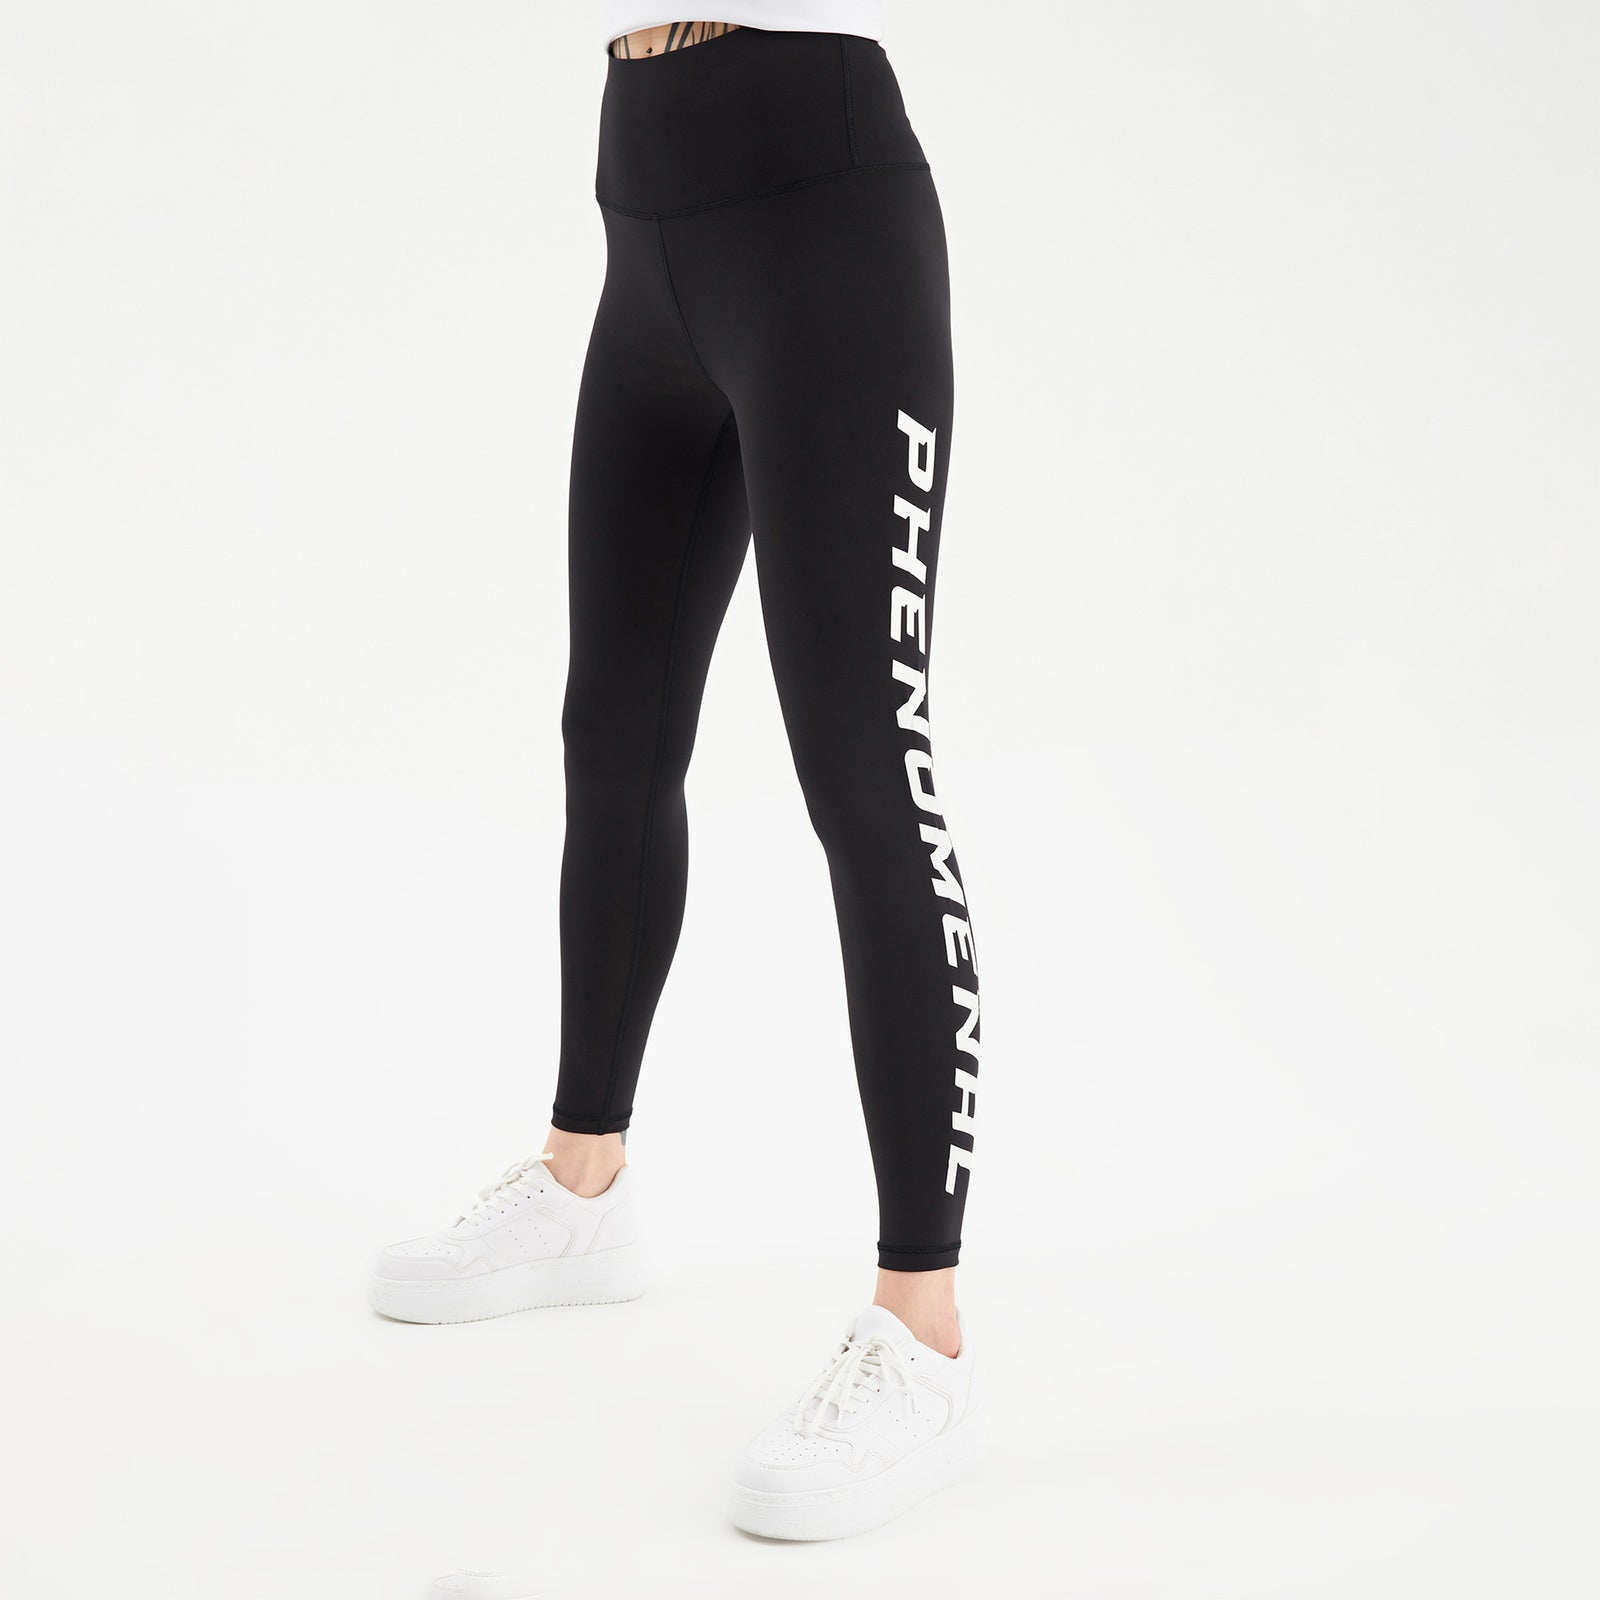 Gym Leggings  Buy Gym Tights  Gym Pants for Women Online  Zivame